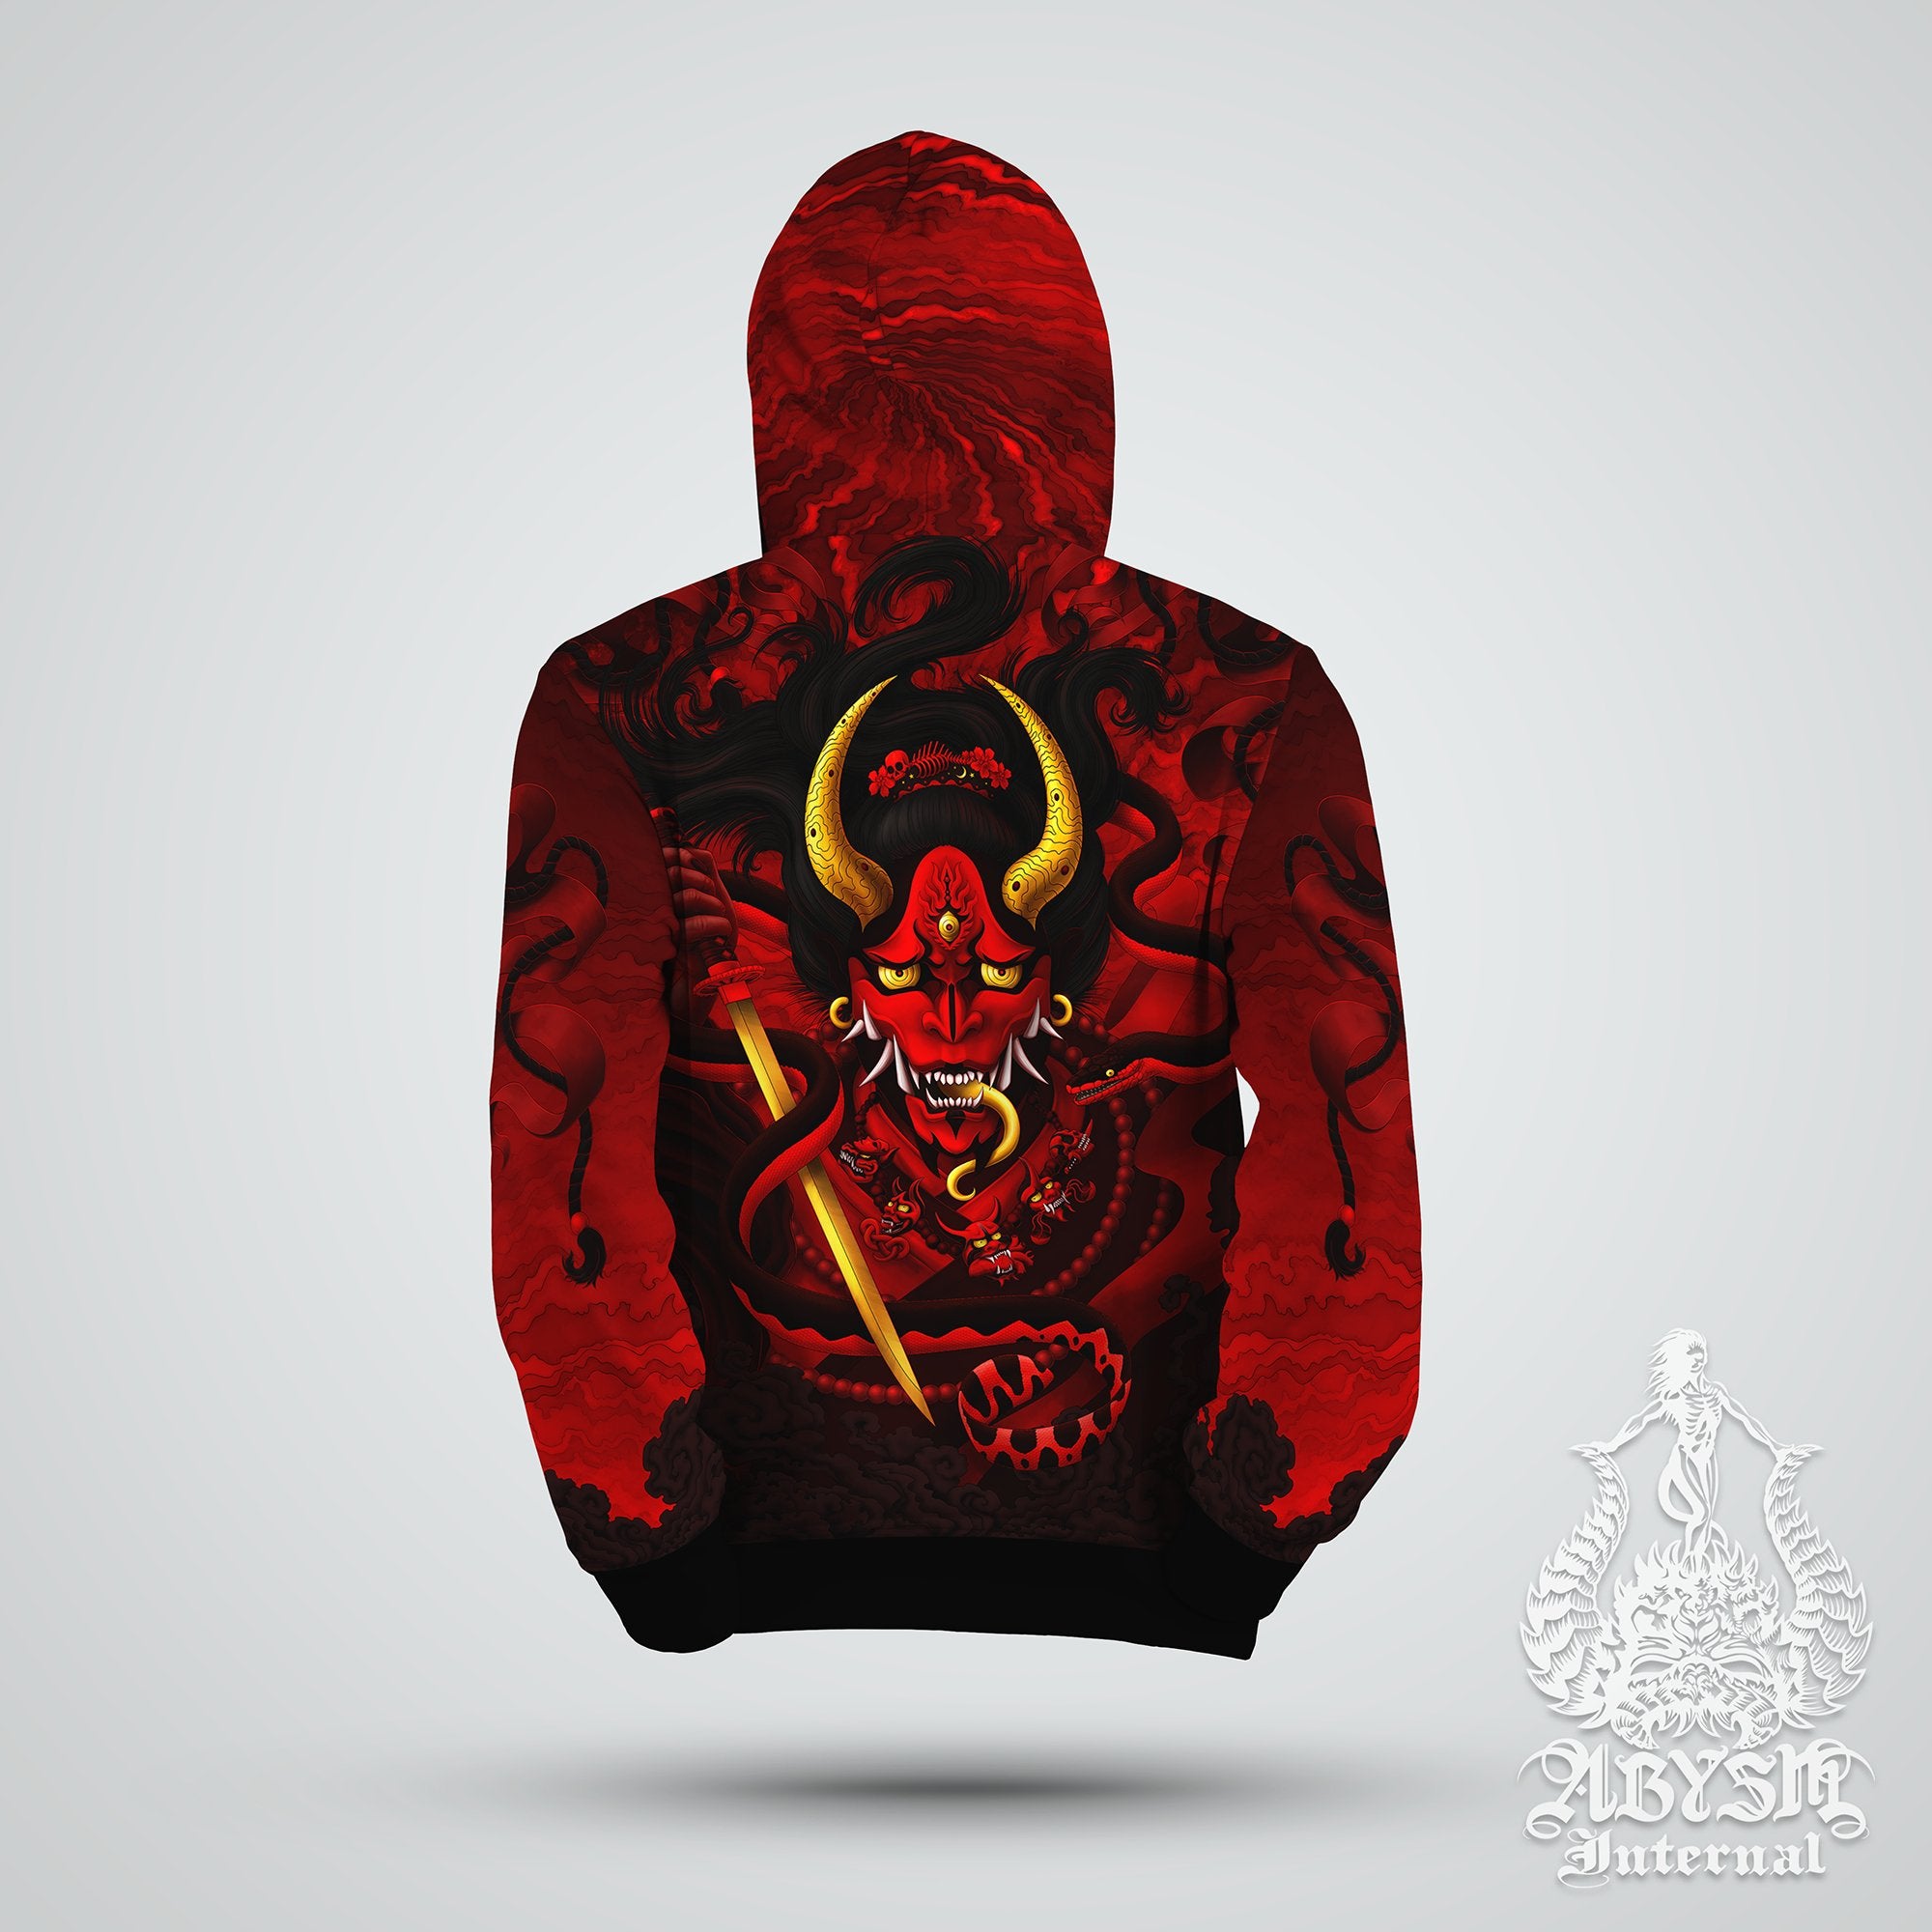 Skater Hoodie, Japanese Demon Sweater, Anime and Manga Streetwear, Bloody Gothic Street Outfit, Red and Black Hannya Pullover, Alternative Clothing, Unisex - Oni and Snake - Abysm Internal